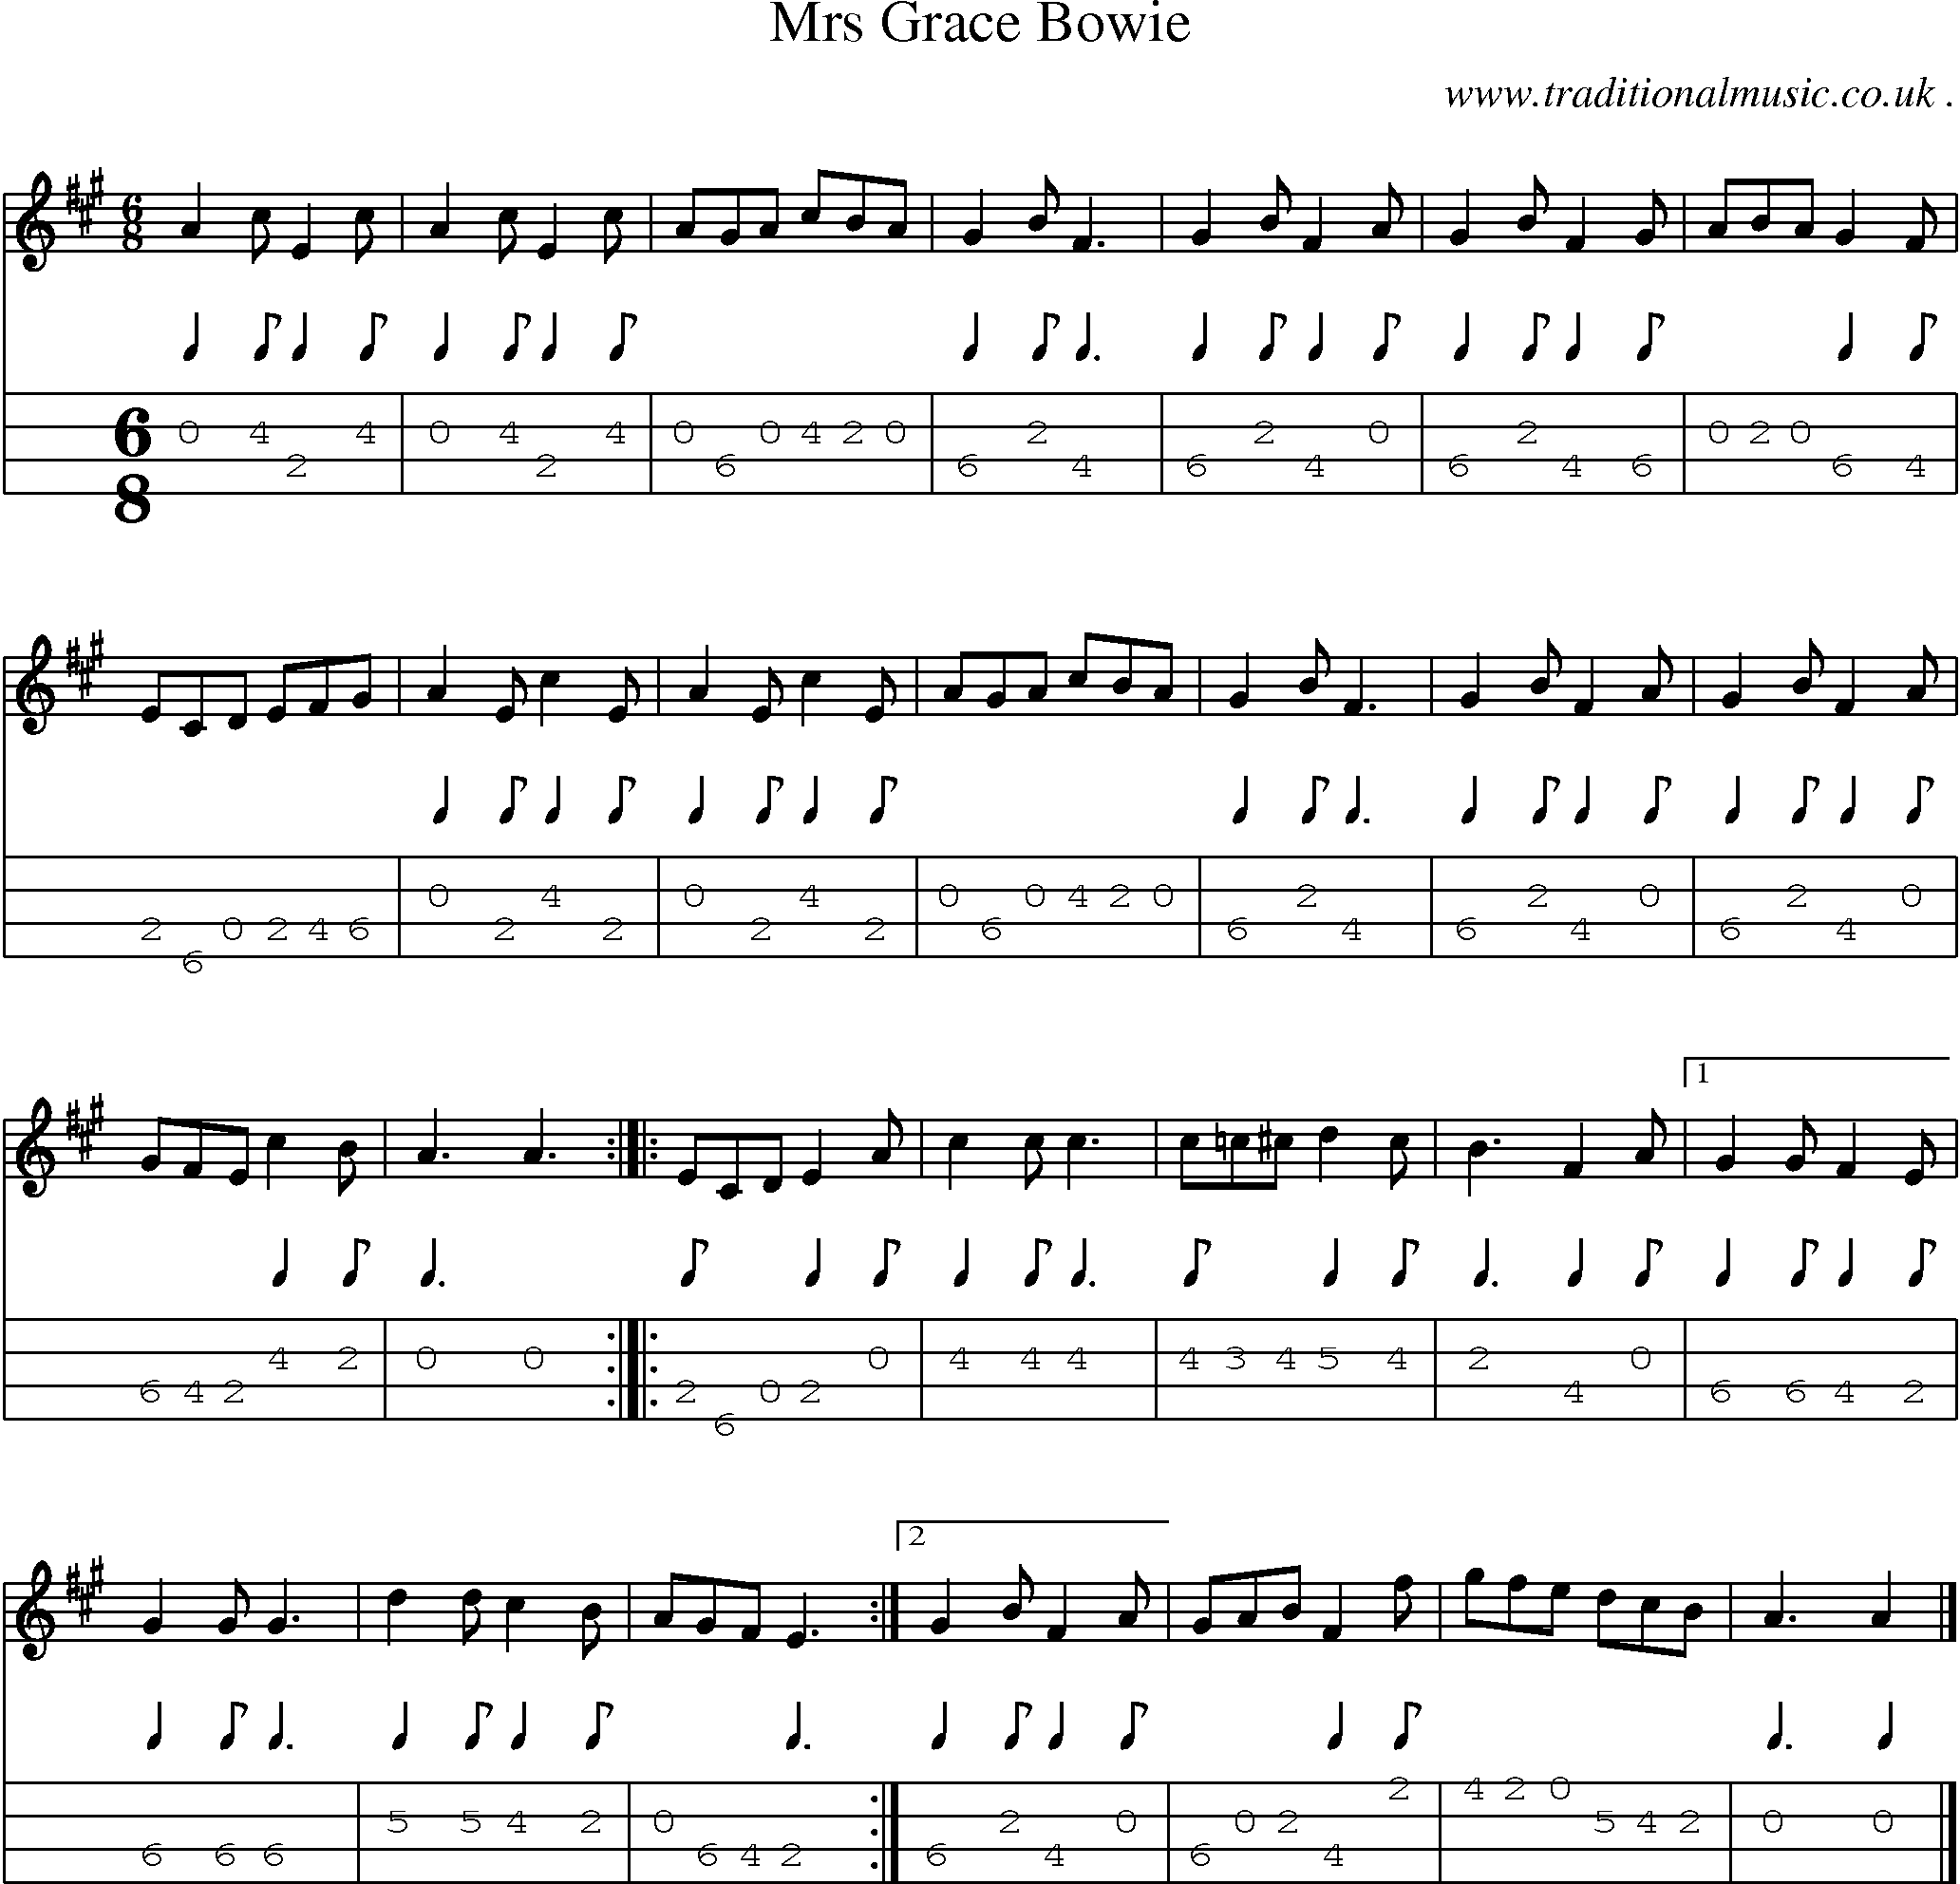 Sheet-music  score, Chords and Mandolin Tabs for Mrs Grace Bowie